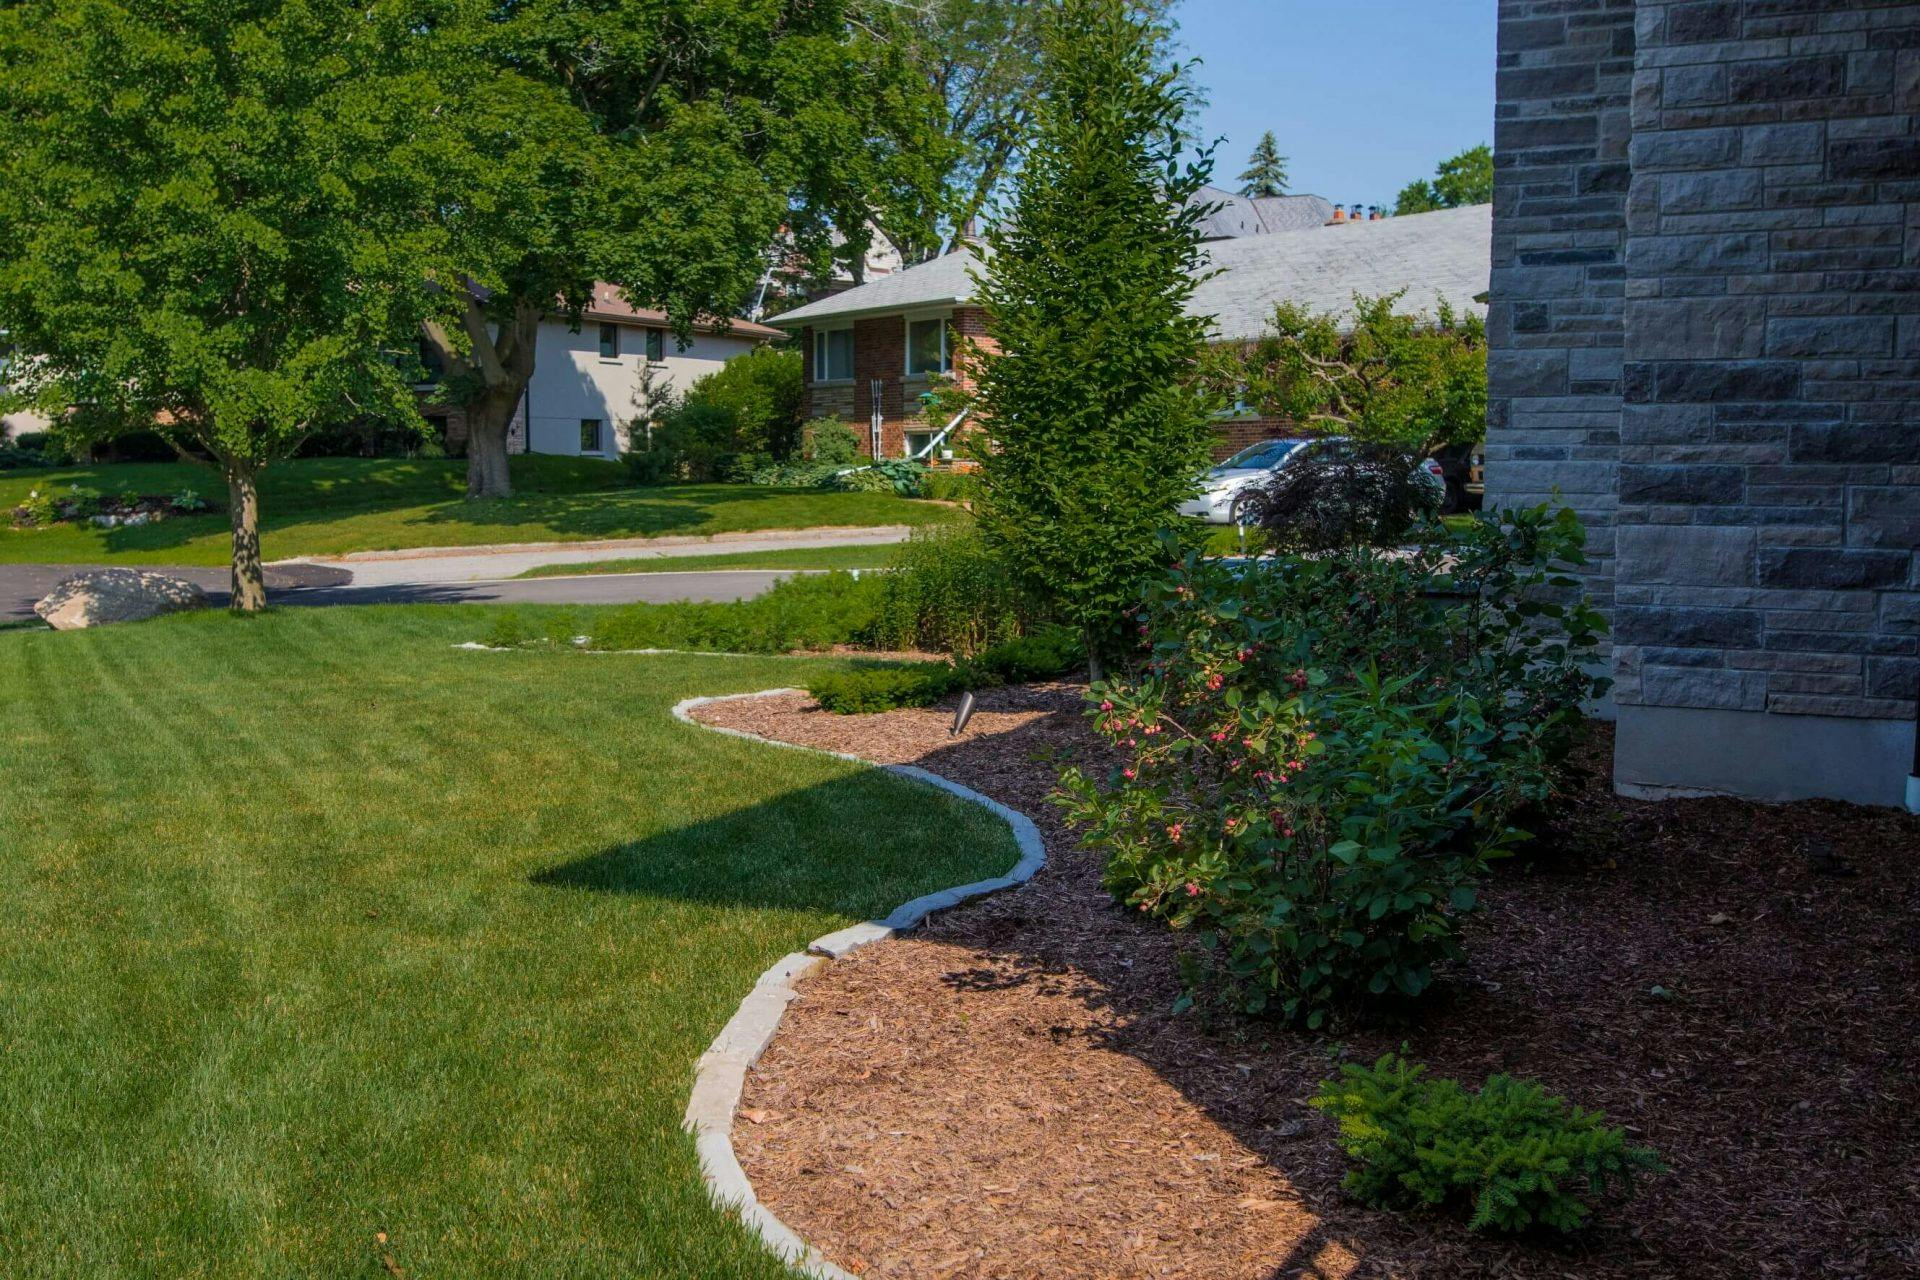 Maintained garden with mulch